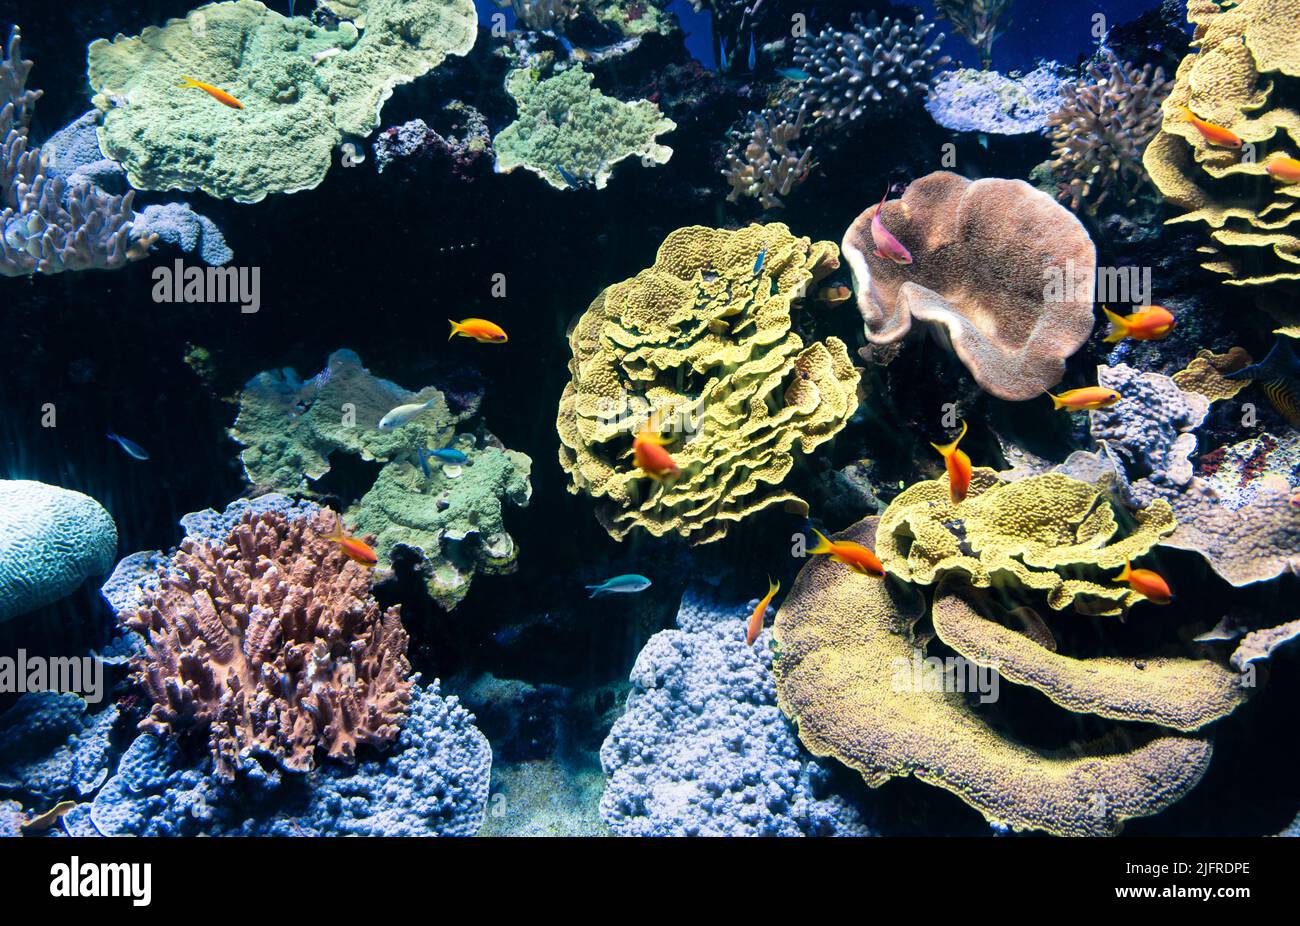 Underwater picture with the beautiful colors and shapes of the corals. Underwater life landscape with many colorful fishes swimming along the corals. Stock Photo